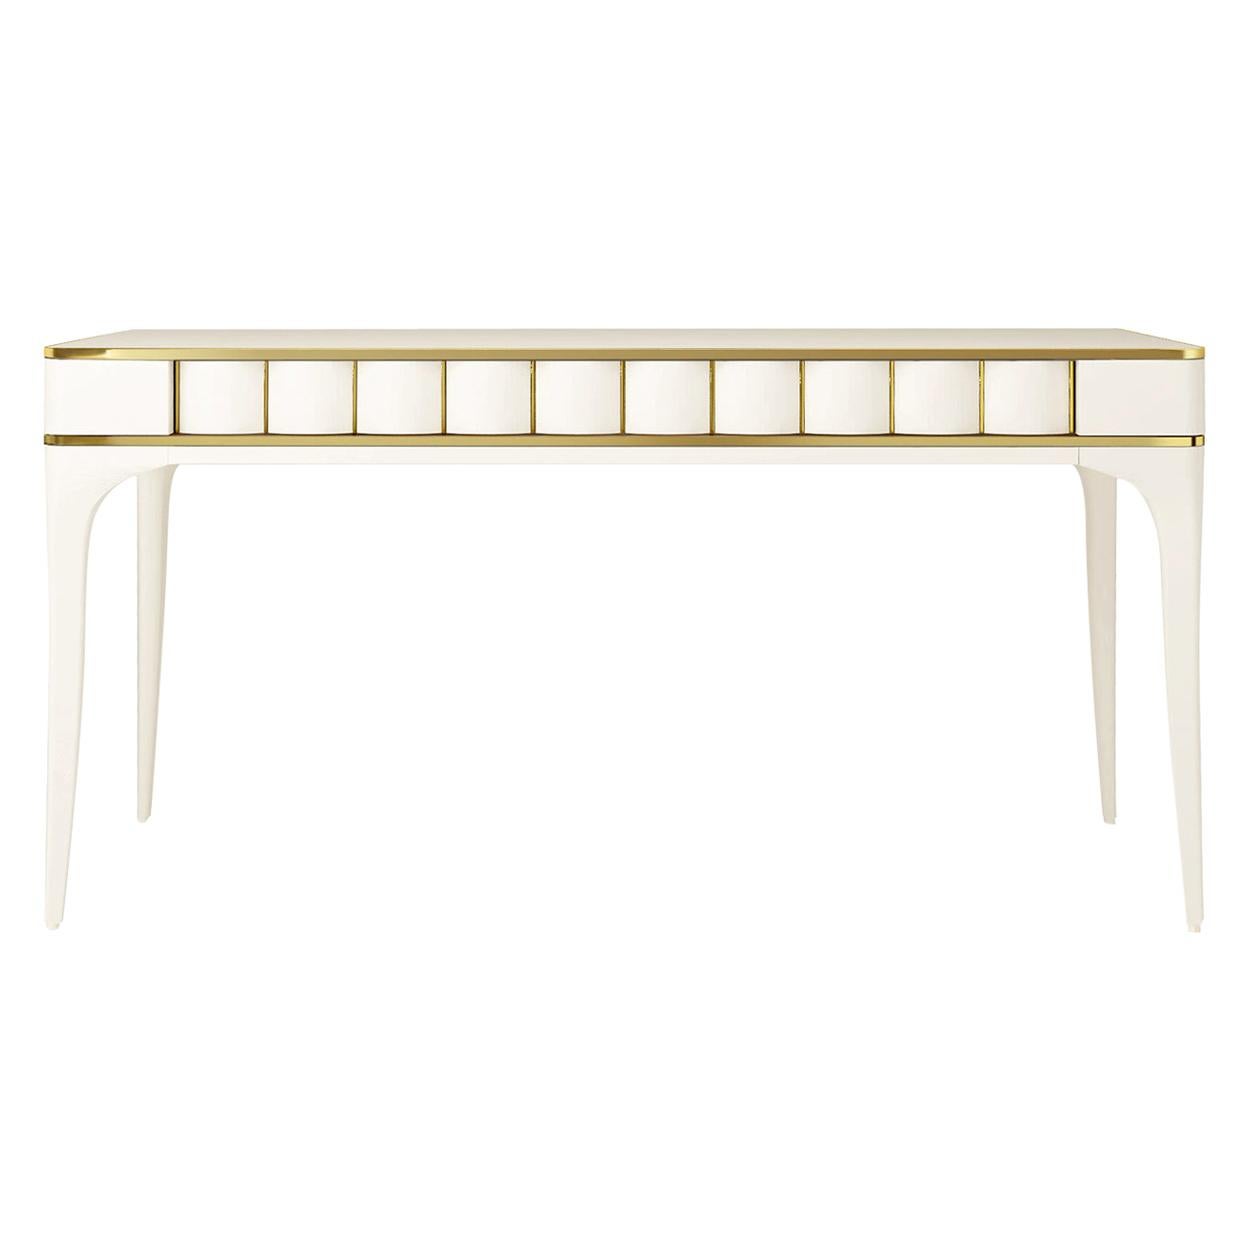 Isabella Costantini, Italy, Duilio Desk with Polished Brass For Sale